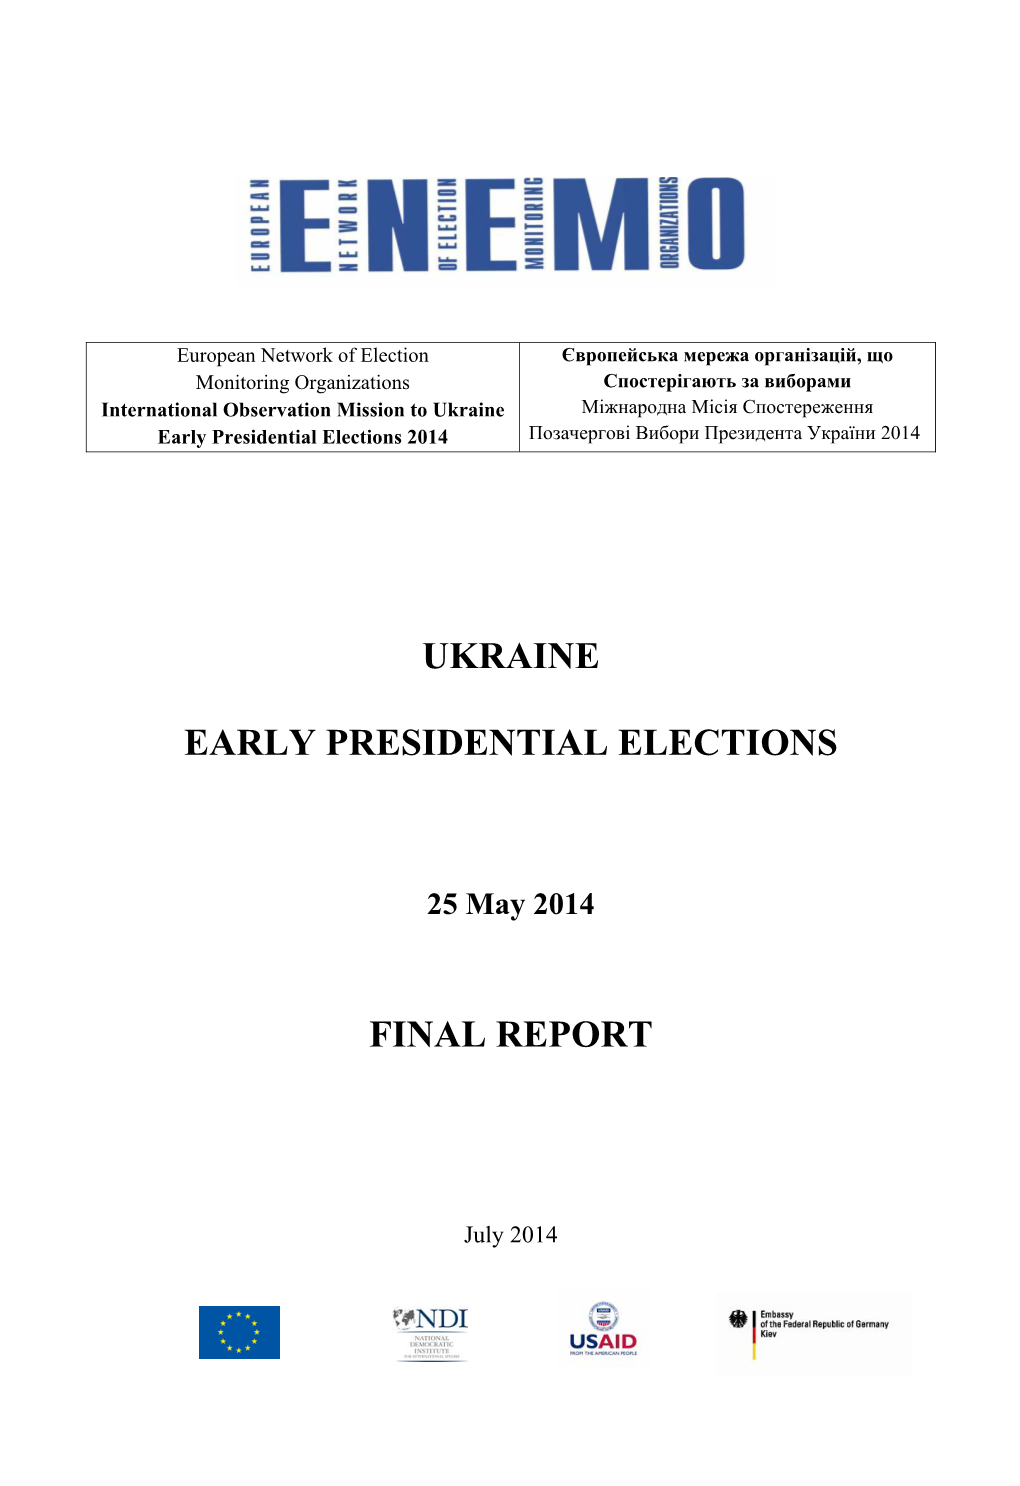 Ukraine Early Presidential Elections Final Report